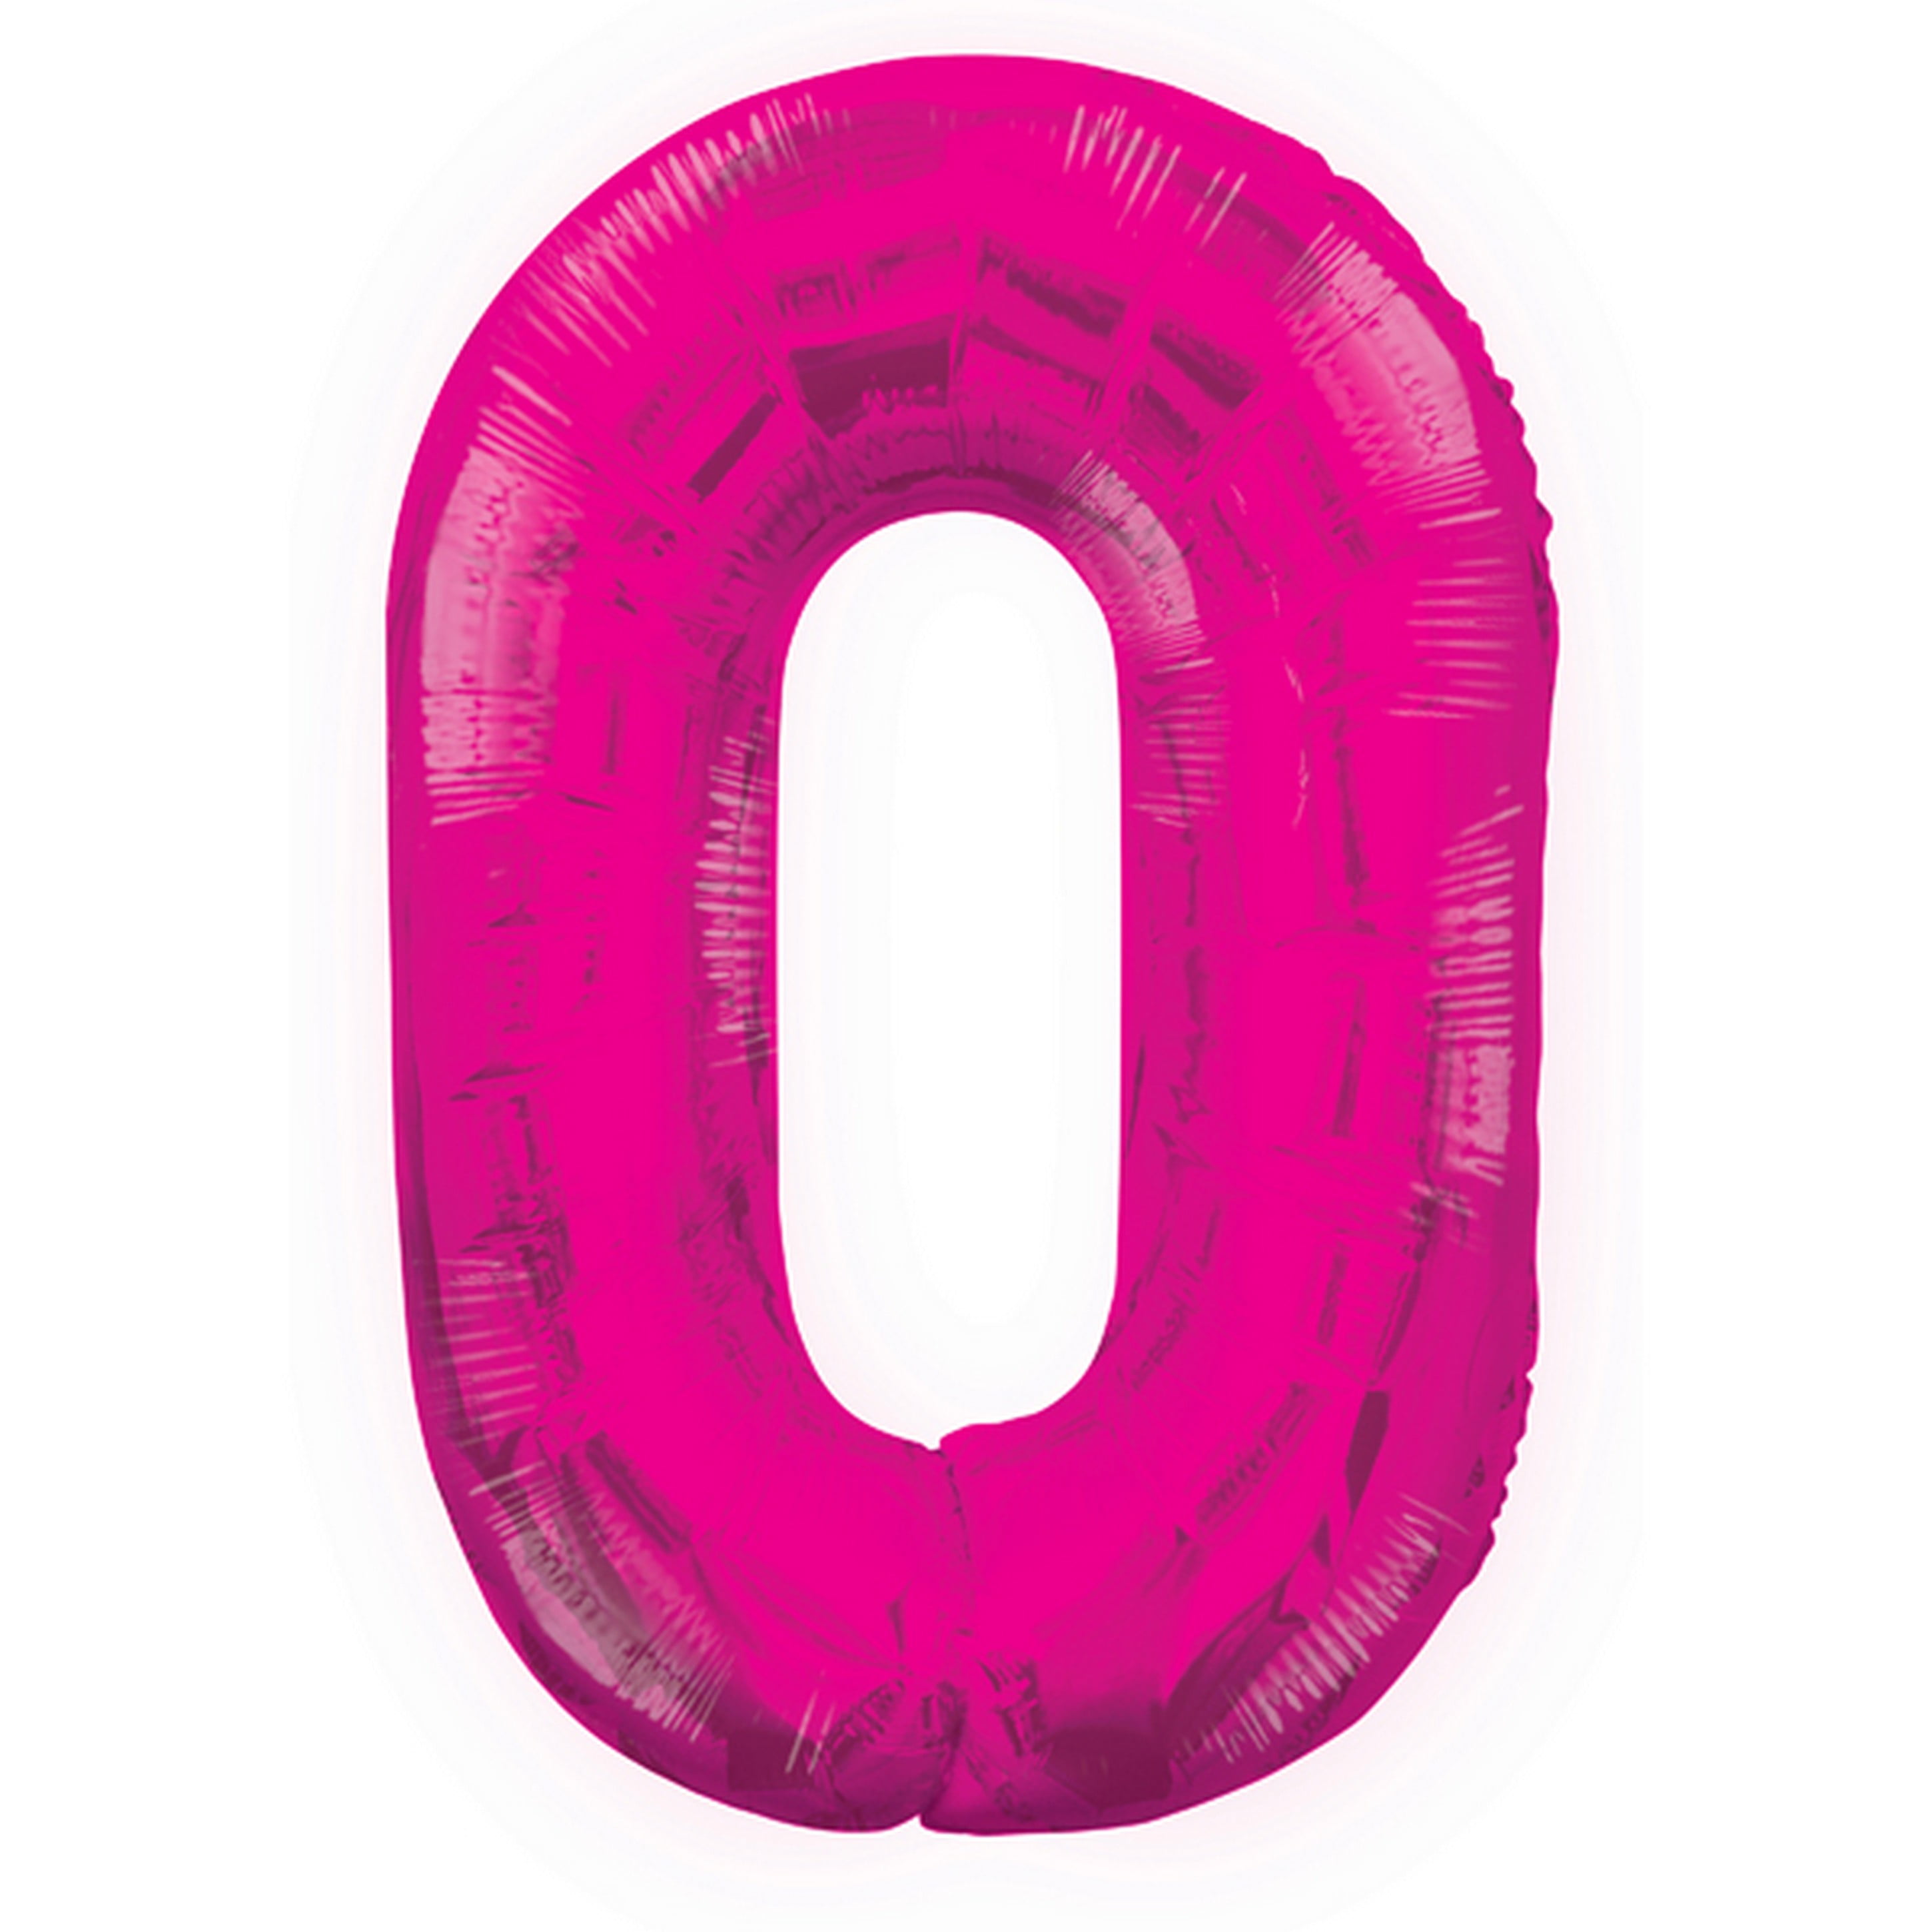 34" Helium Quality {Unique} Pink Glitz All Ages Large Number Foil Balloons 